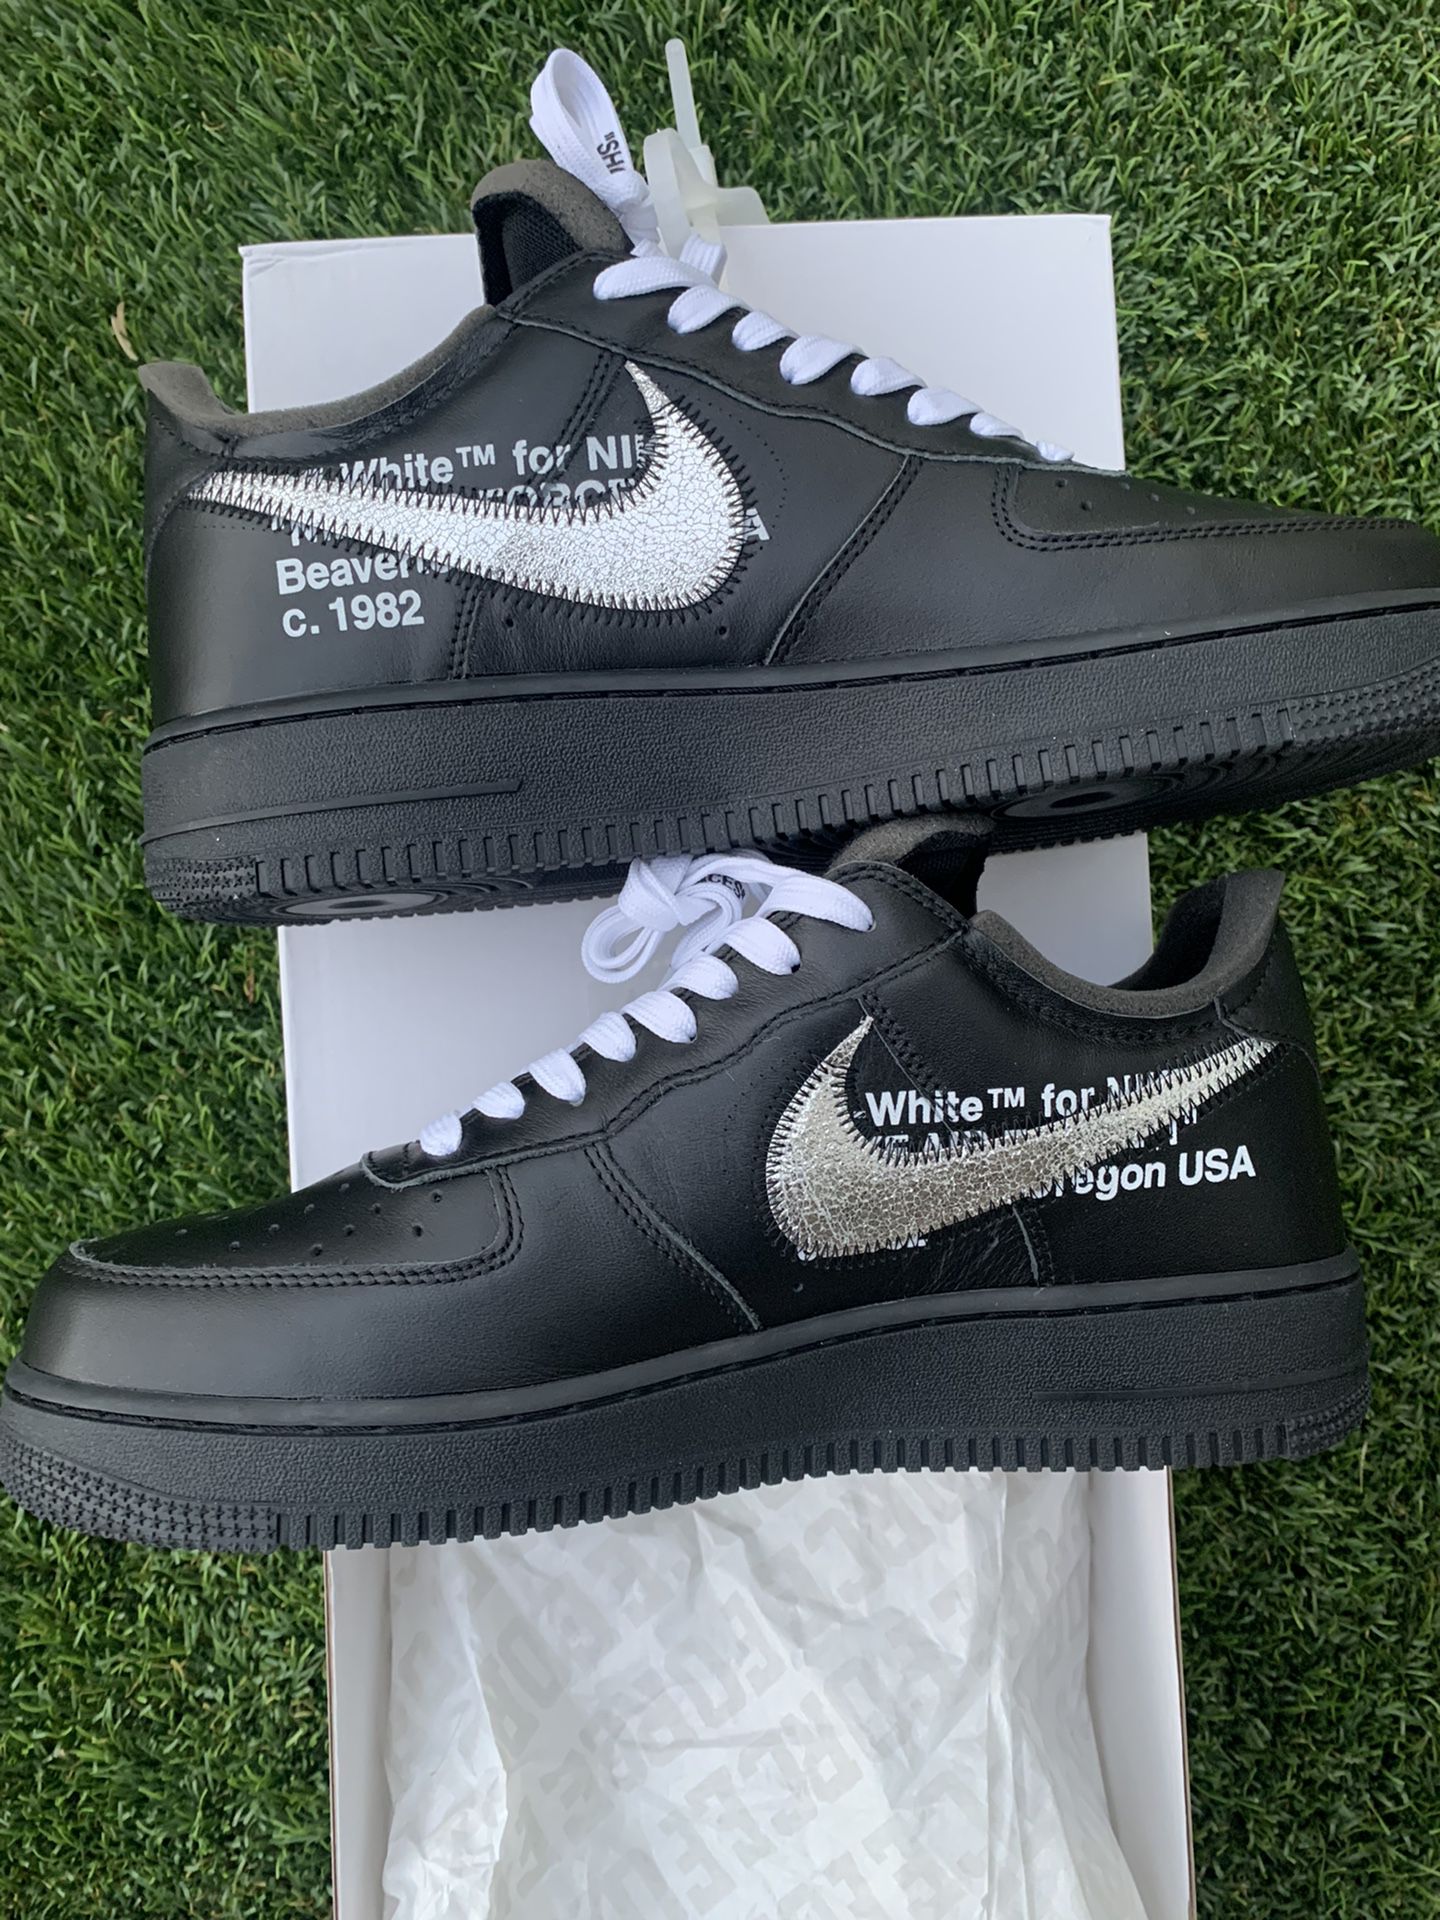 NIKE MOMA AIR FORCE 1 OFF WHITE